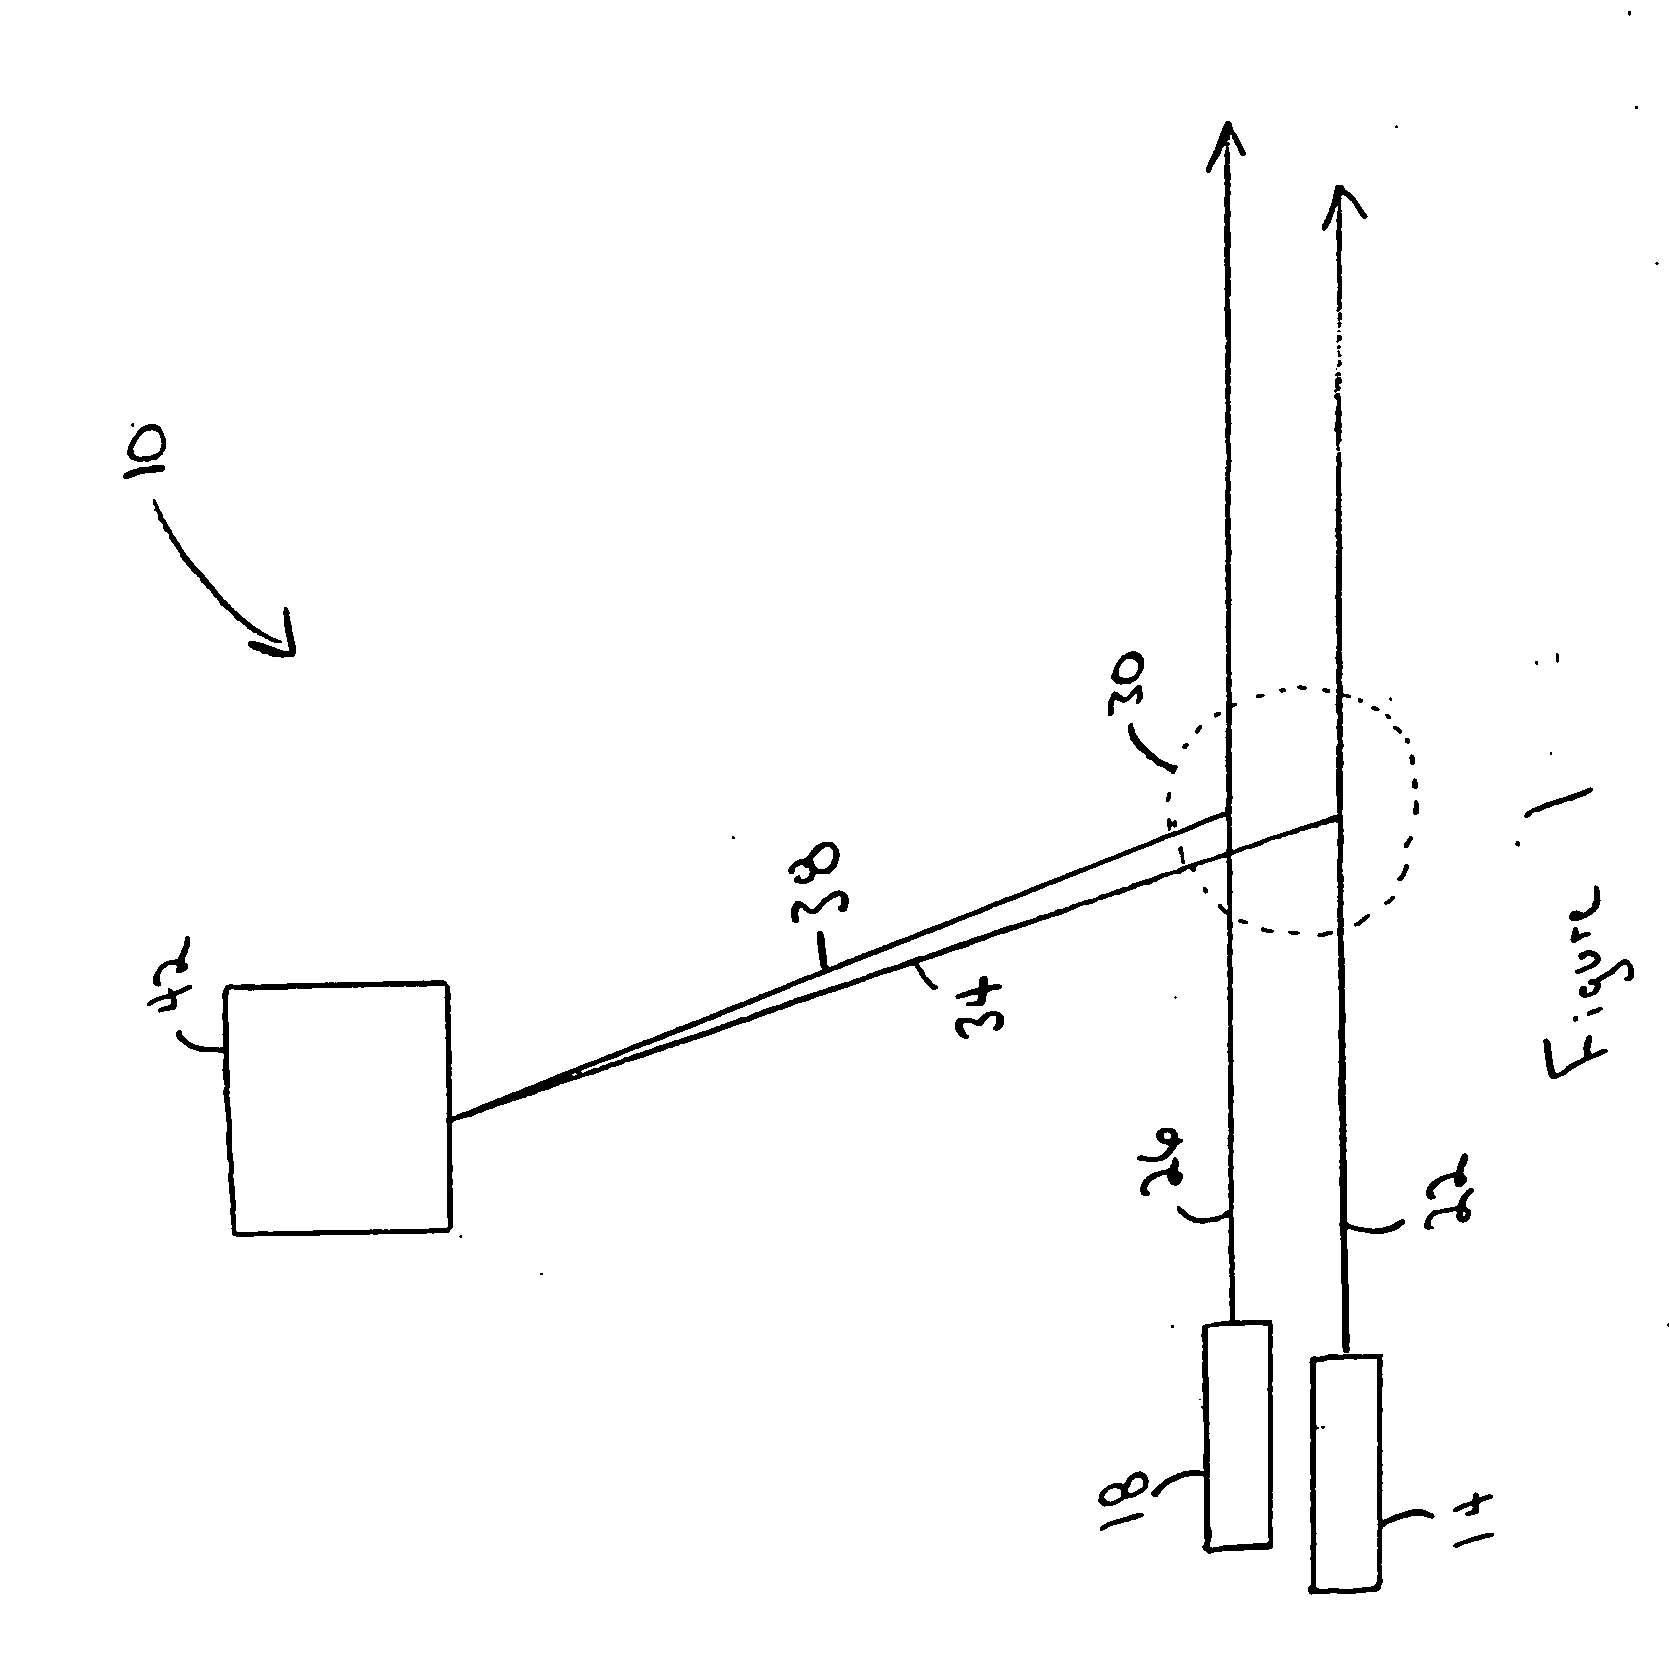 Method and apparatus for measuring particle motion optically